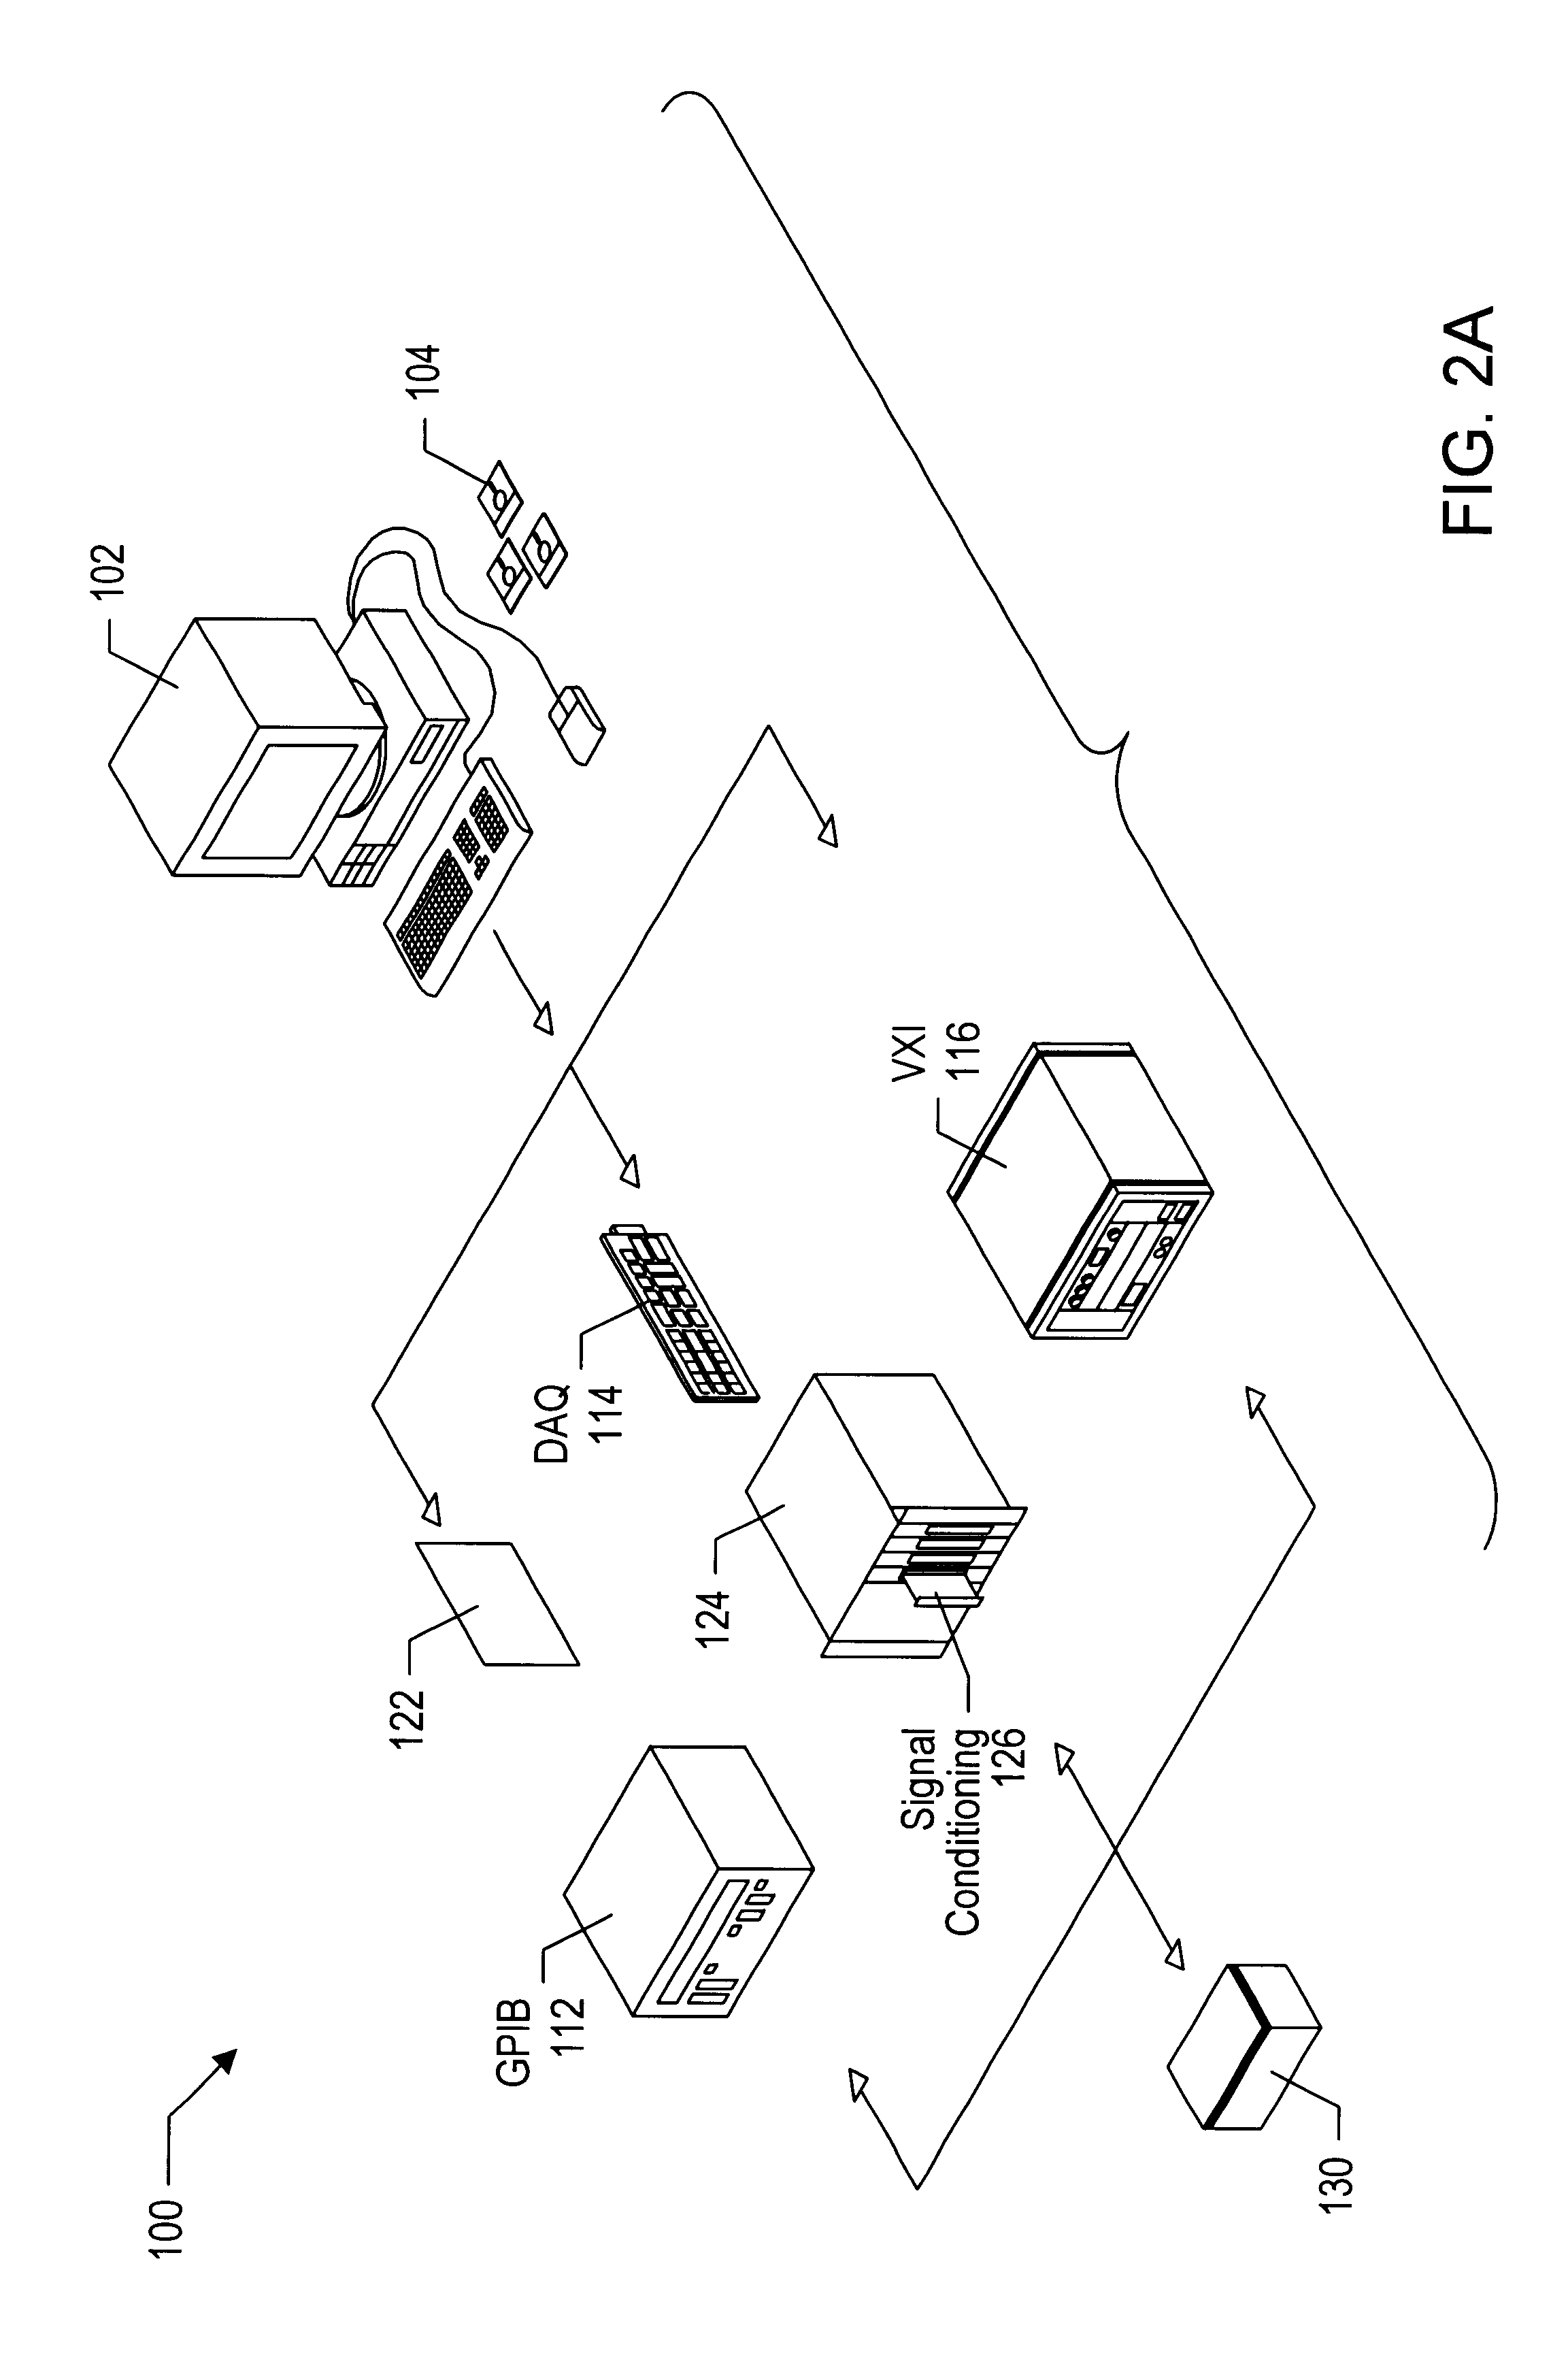 System and method for simulating operations of an instrument